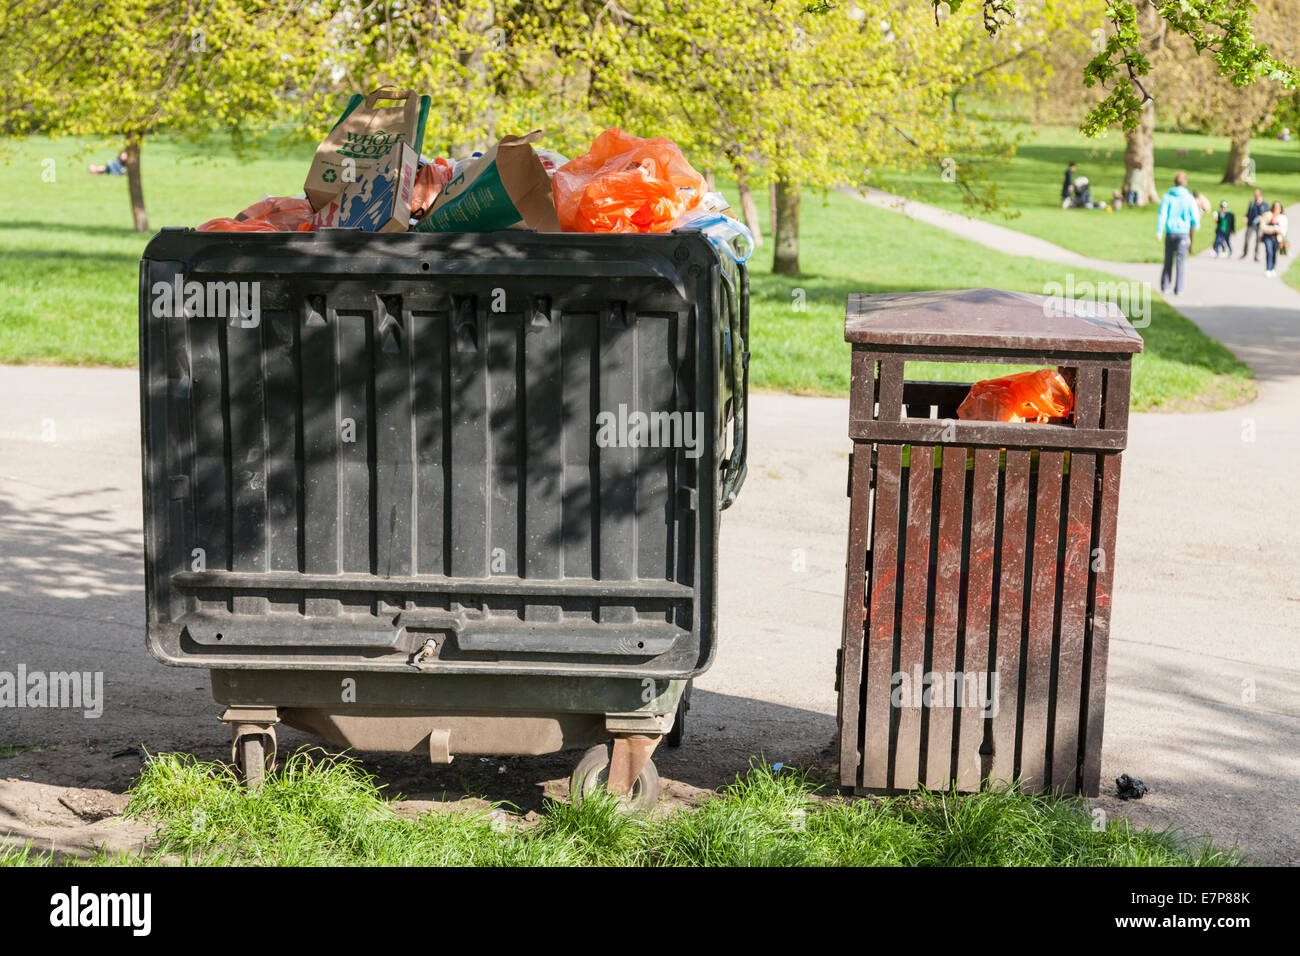 Large wheelie bin next to a litter bin, both bins full with rubbish at a park in London, England, UK Stock Photo